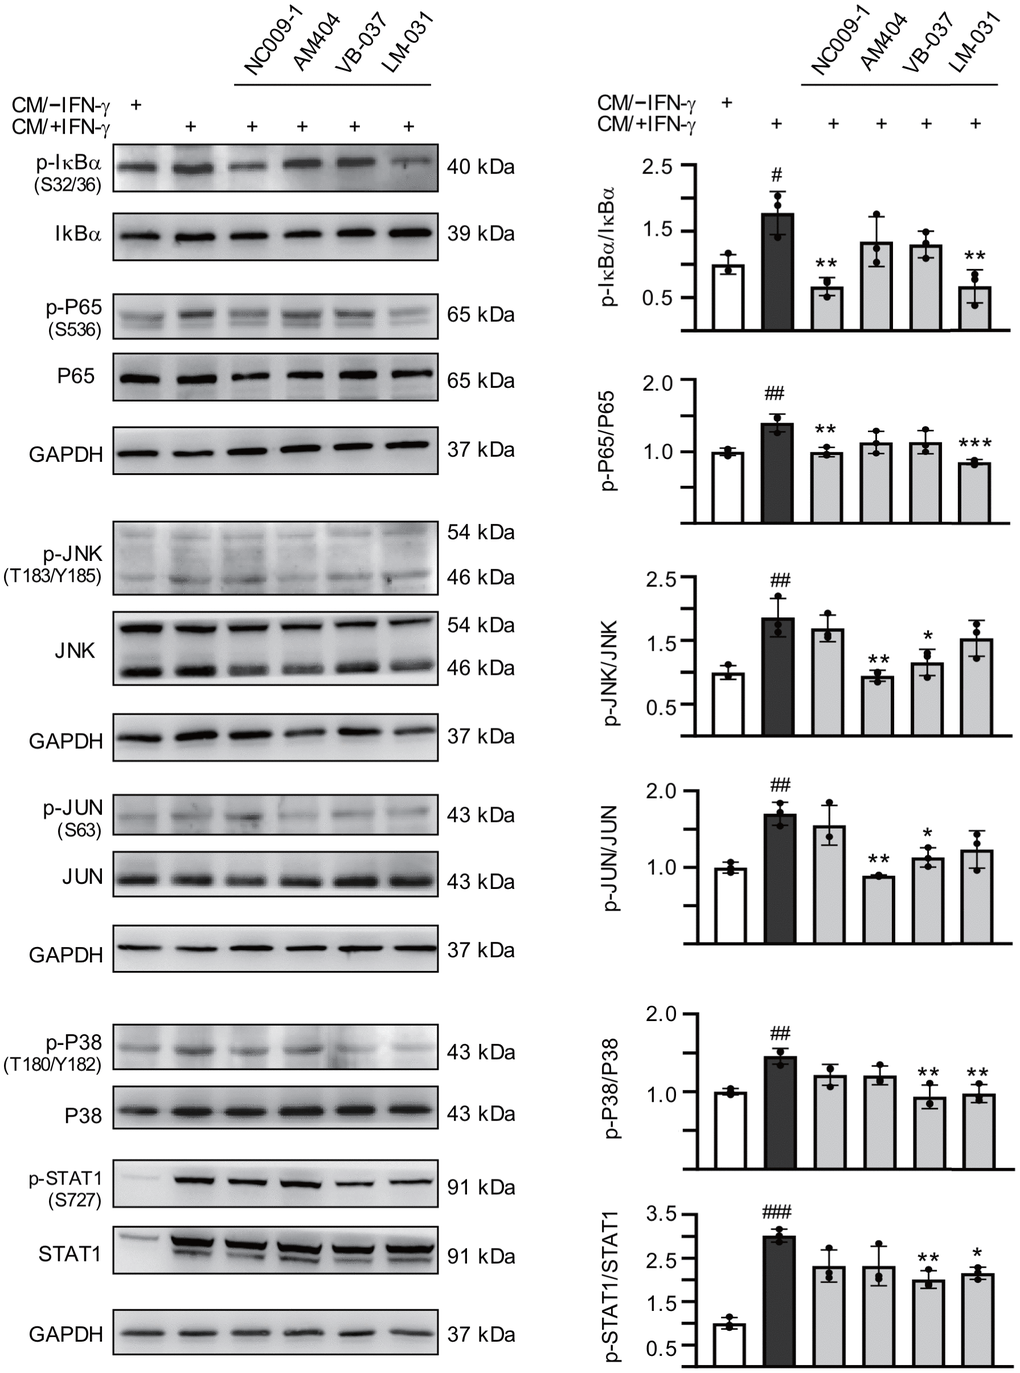 Effects of the tested compounds on IL-1β- and TNF-α-mediated pathways in inflamed ATXN3/Q75-GFP SH-SY5Y cells. Retinoic acid (10 μM)-differentiated ATXN3/Q75-GFP SH-SY5Y cells were treated with the tested compound (10 μM) for 8 h, followed by inducing ATXN3/Q75 expression for 6 days, with retinoic acid removal and HMC3 conditioned medium addition (CM/+IFN-γ or CM/–IFN-γ, 1:1 ratio) for the last 2 days. IL-1β-mediated pathways including IκBα (S32/36), P65 (S536), JNK (T183/Y185), JUN (S63), P38 (T180/Y182), and STAT1 (S727) ratios were examined (n = 3). To normalize, the relative phospho/total ratio of cells without CM stimulation was set at 100%. P values: comparisons between cells stimulated with CM/+IFN-γ and CM/–IFN-γ (#: P ##: P ###: P P P P post hoc Tukey test).